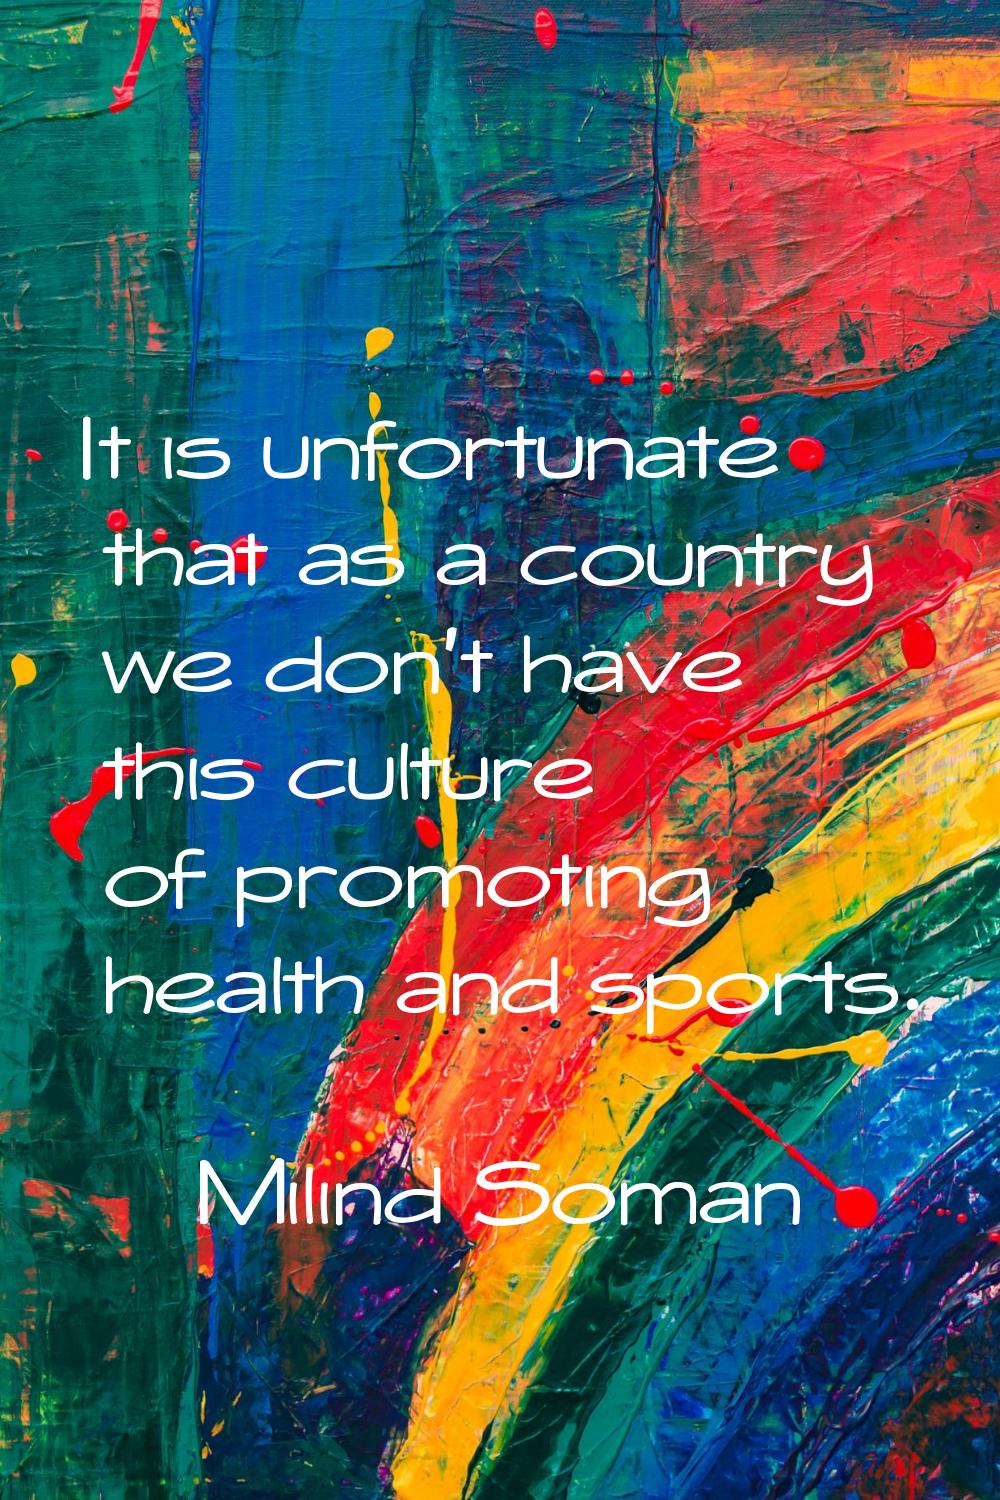 It is unfortunate that as a country we don't have this culture of promoting health and sports.